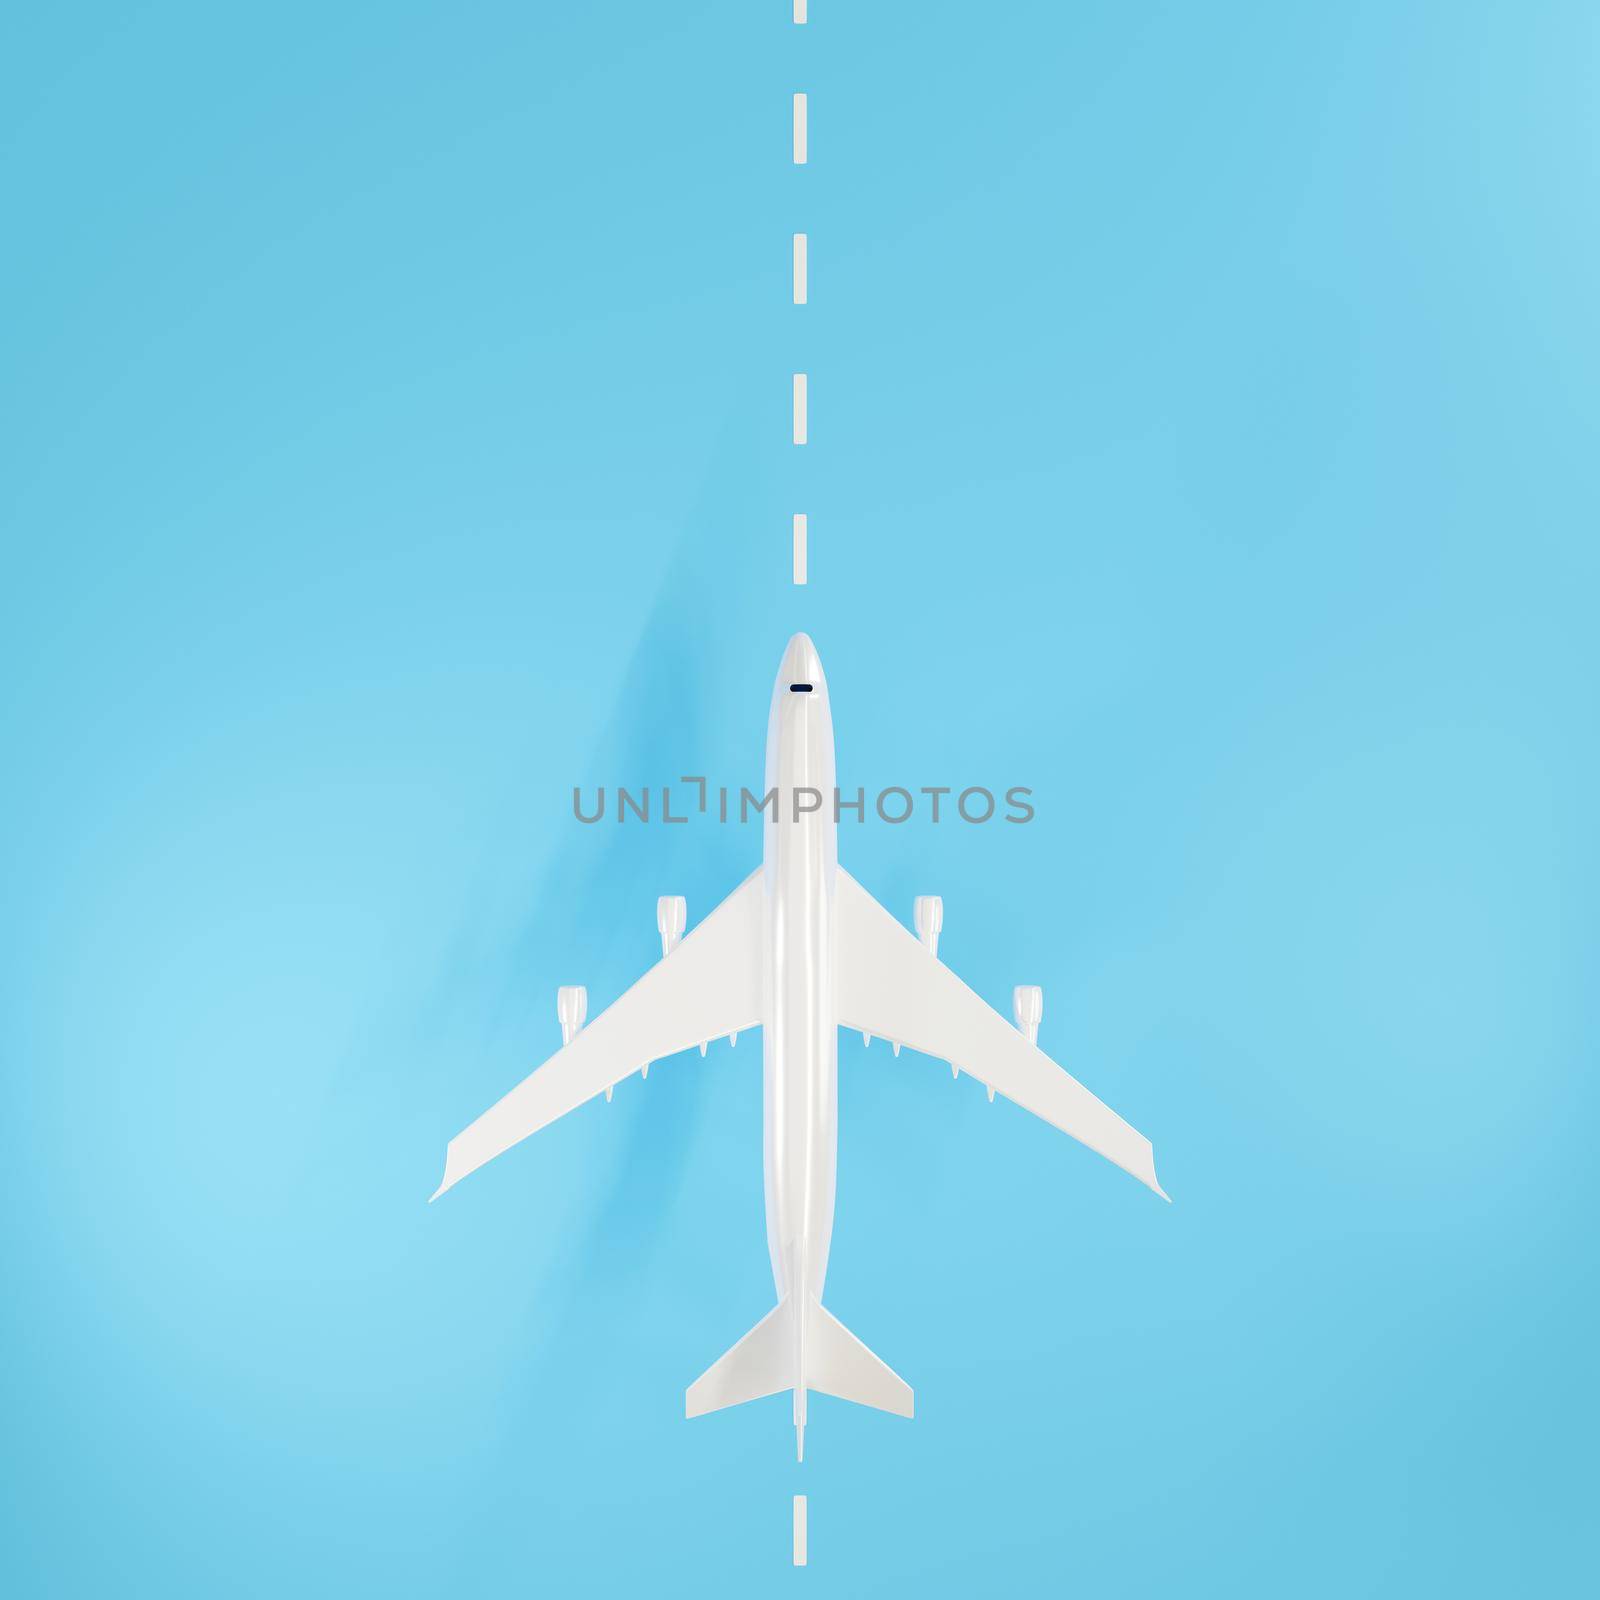 Top view of Airplane during landing or taking off over ground on runway from the airport, Large jet plane takeoff on blue background, business travel flight concept, 3D rendering illustration